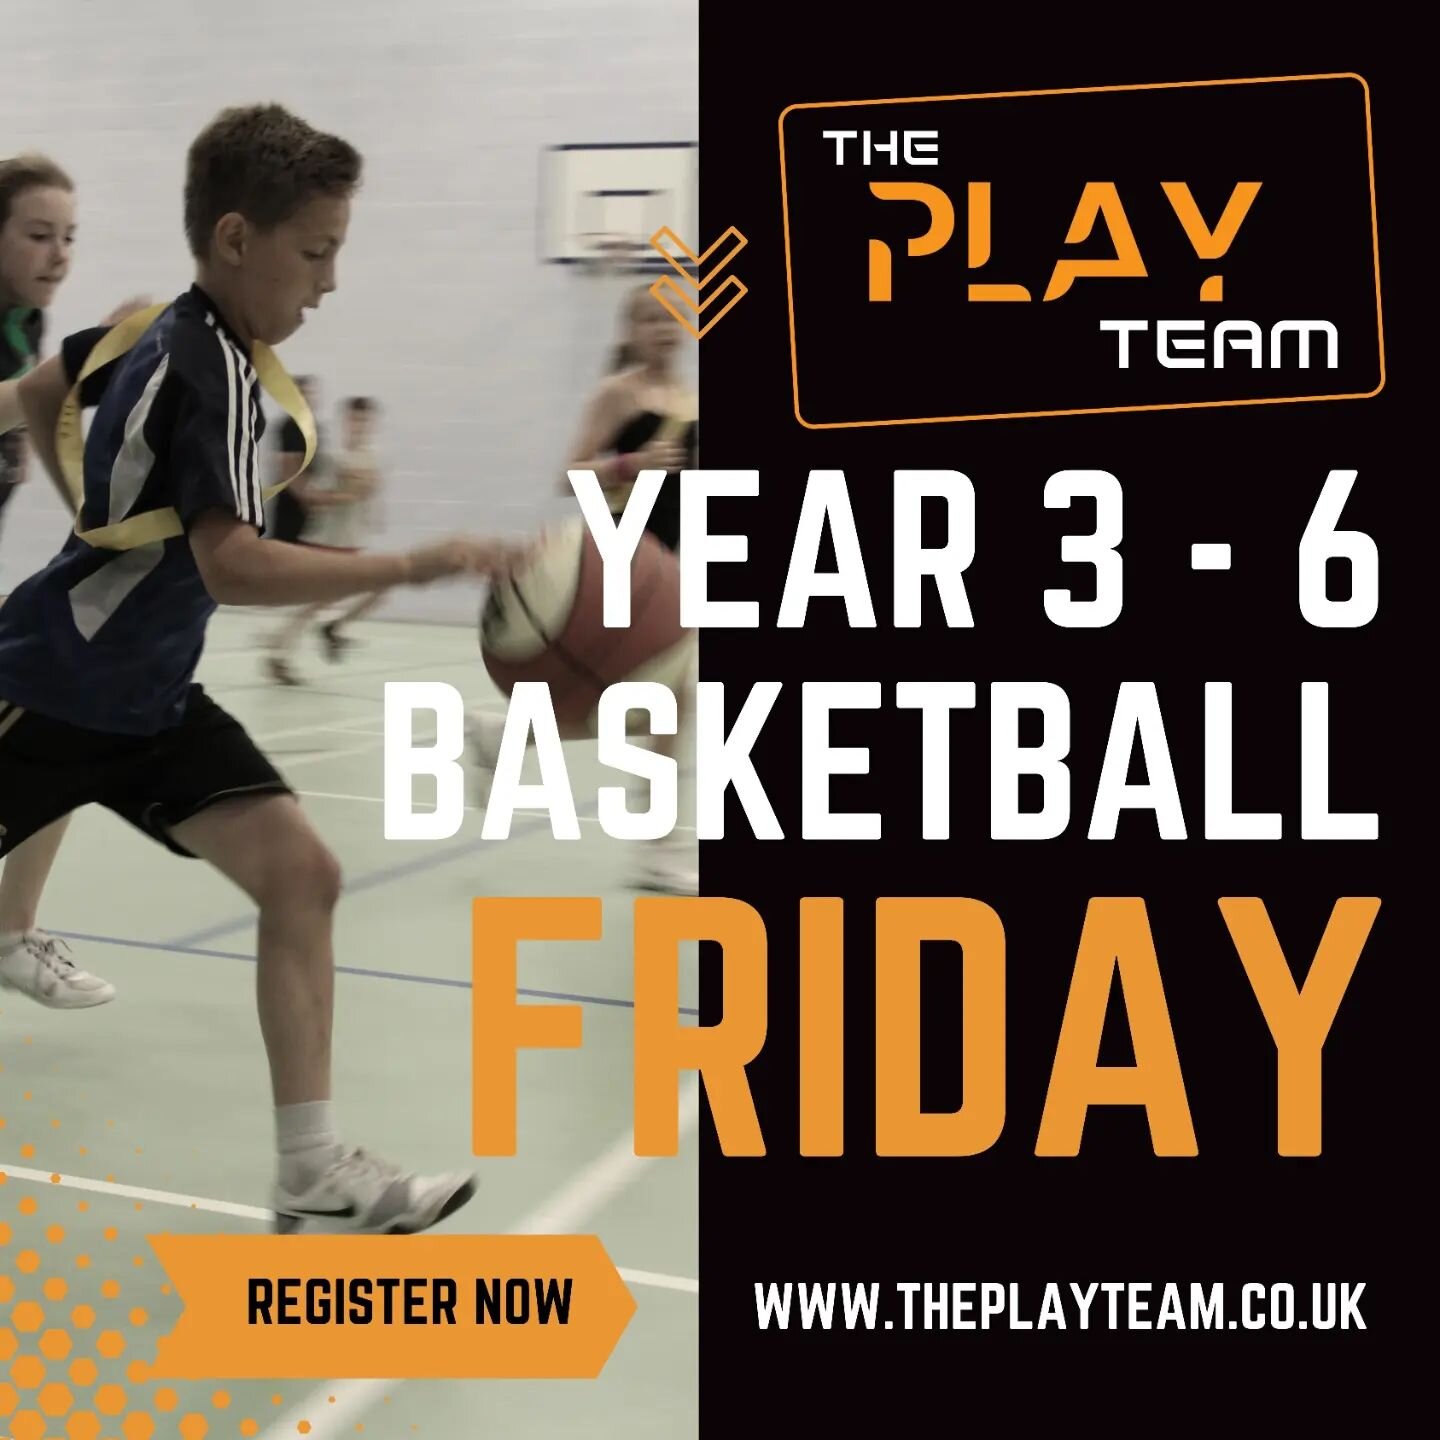 Our new Basketball after-school club starts this Friday (3rd March 2023)!

Basketball is a fast-paced invasion game, developing high levels of both hand-eye co-ordination and fitness. 

This club is run in association with Solent Kestrels and will b